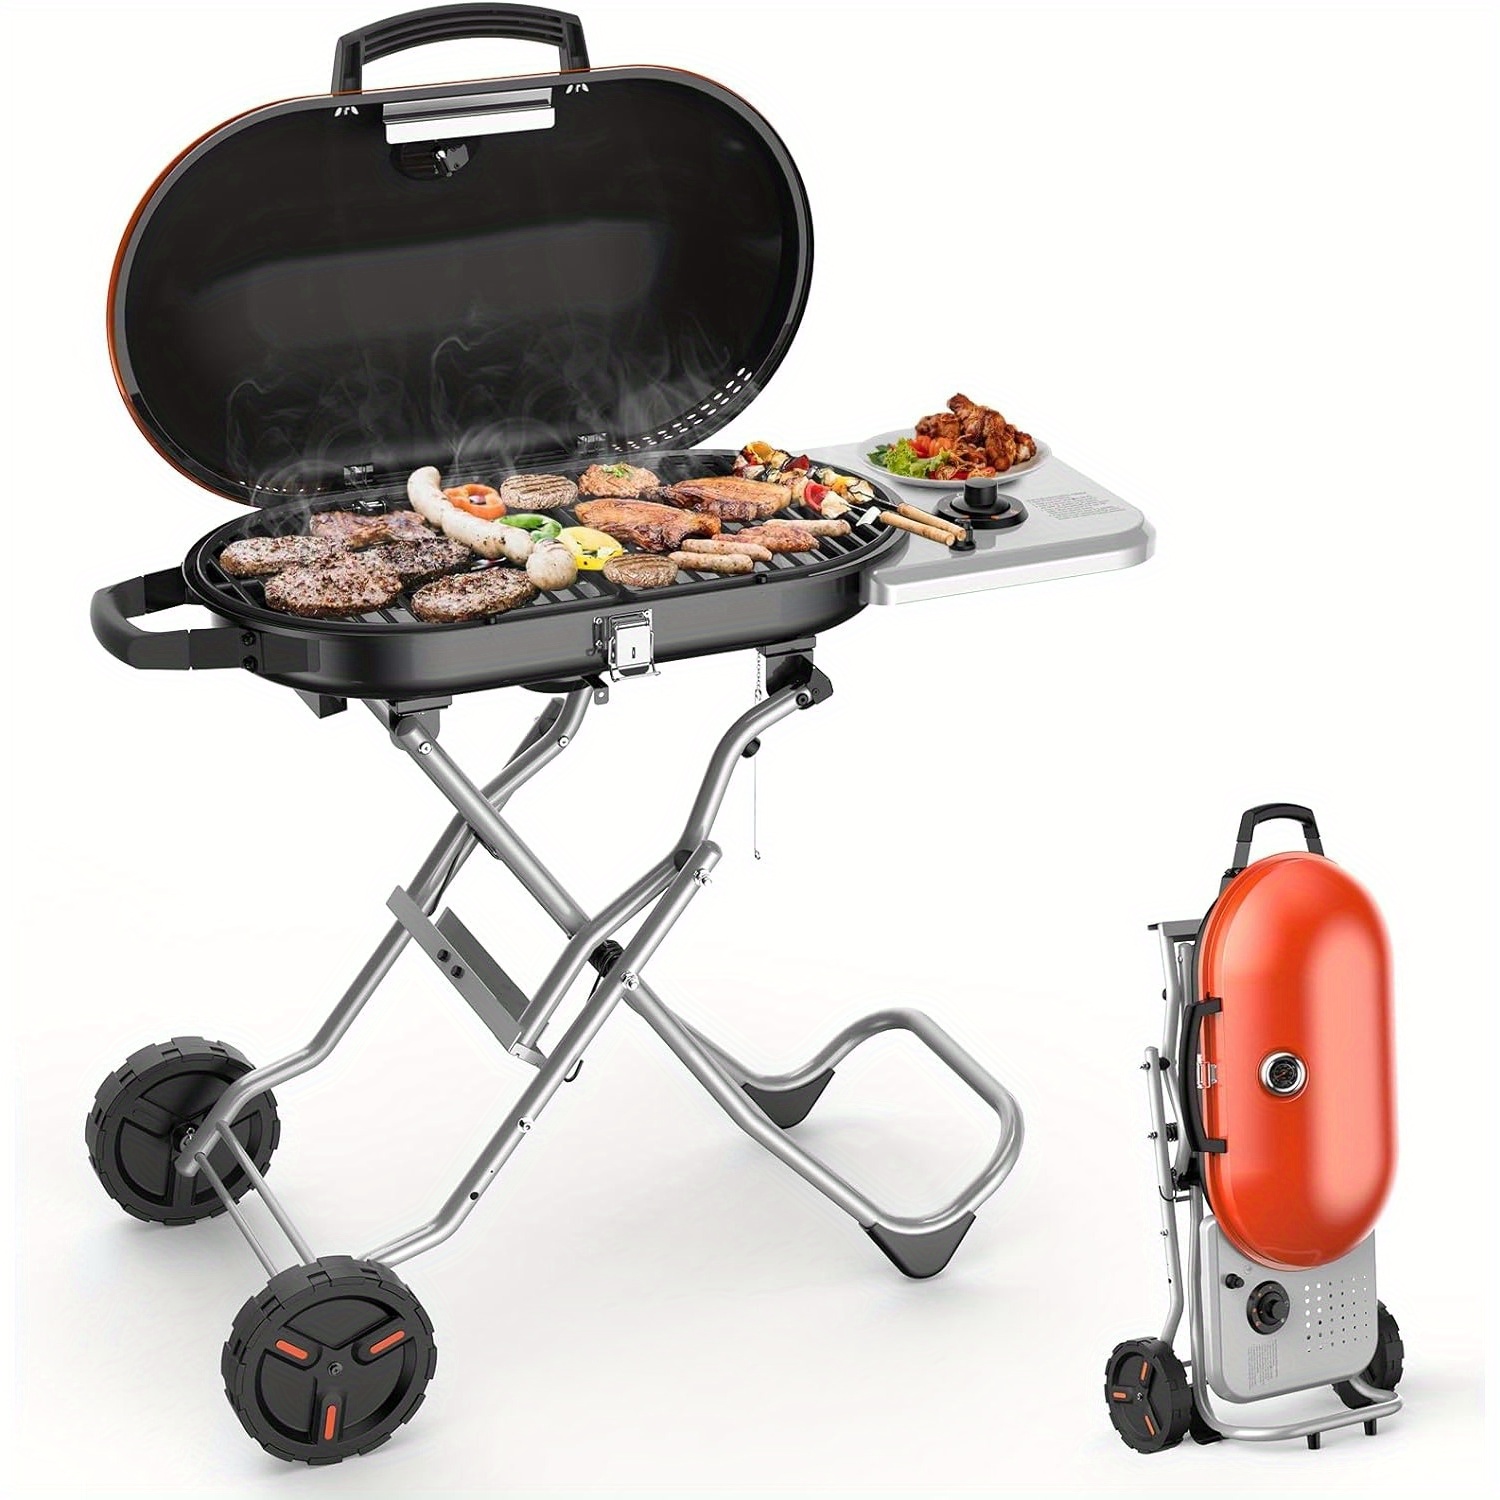 

Portable Propane Gas Grill, 15000 Btus, Bbq Gas Grill With 348 Sq Inch Large Cooking Areas, Sturdy Quick-fold Legs, Portable & Foldable Gas Grill For Outdoor Camping Tailgating Picnic, Orange